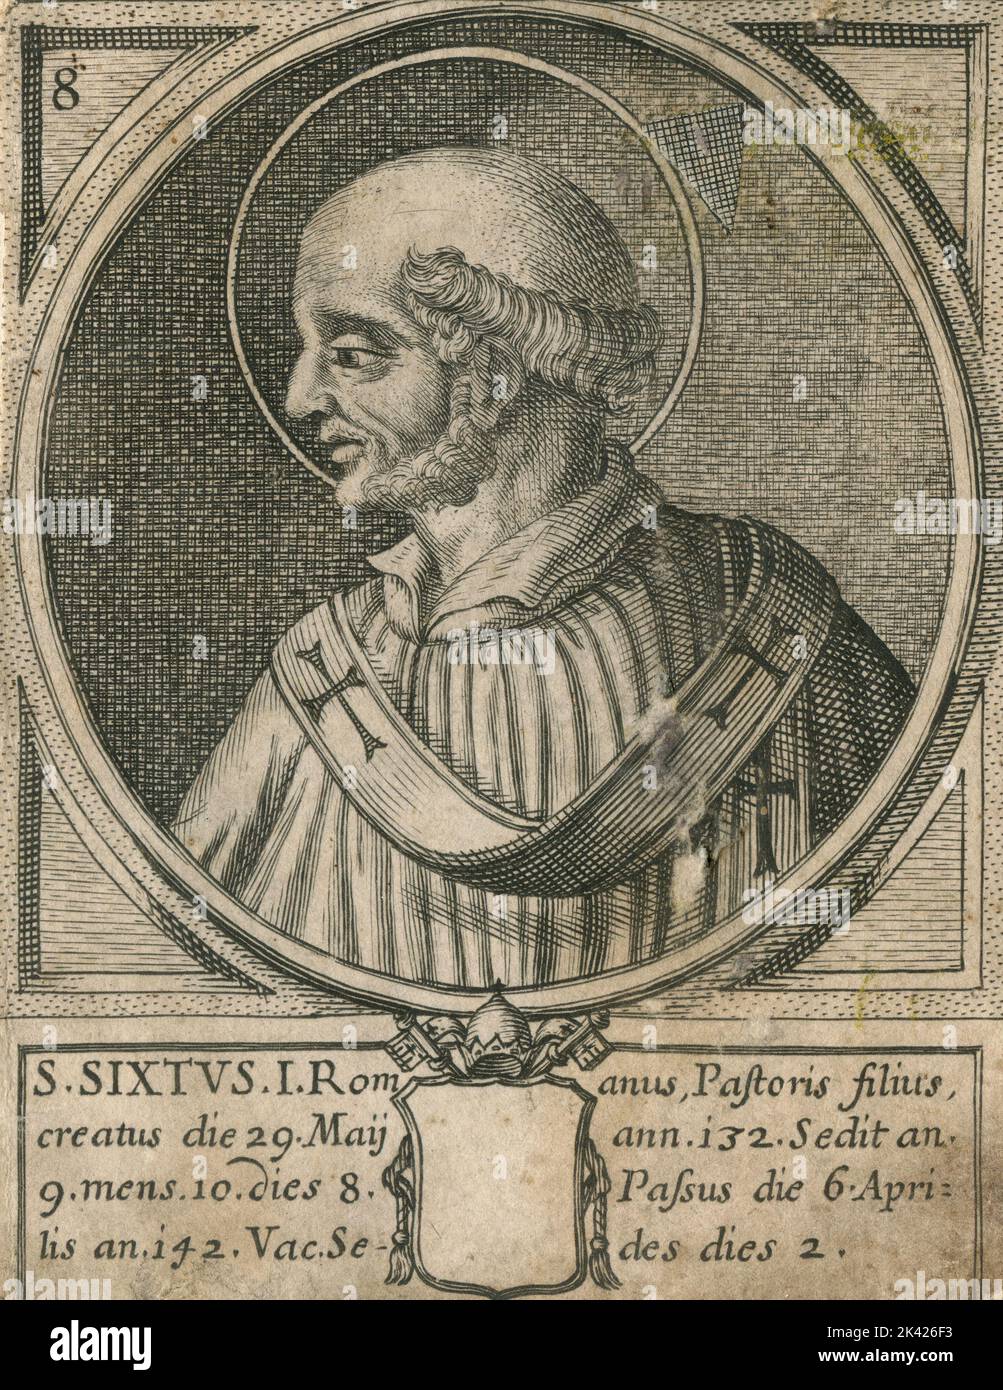 St sixtus hi-res stock photography and images - Alamy